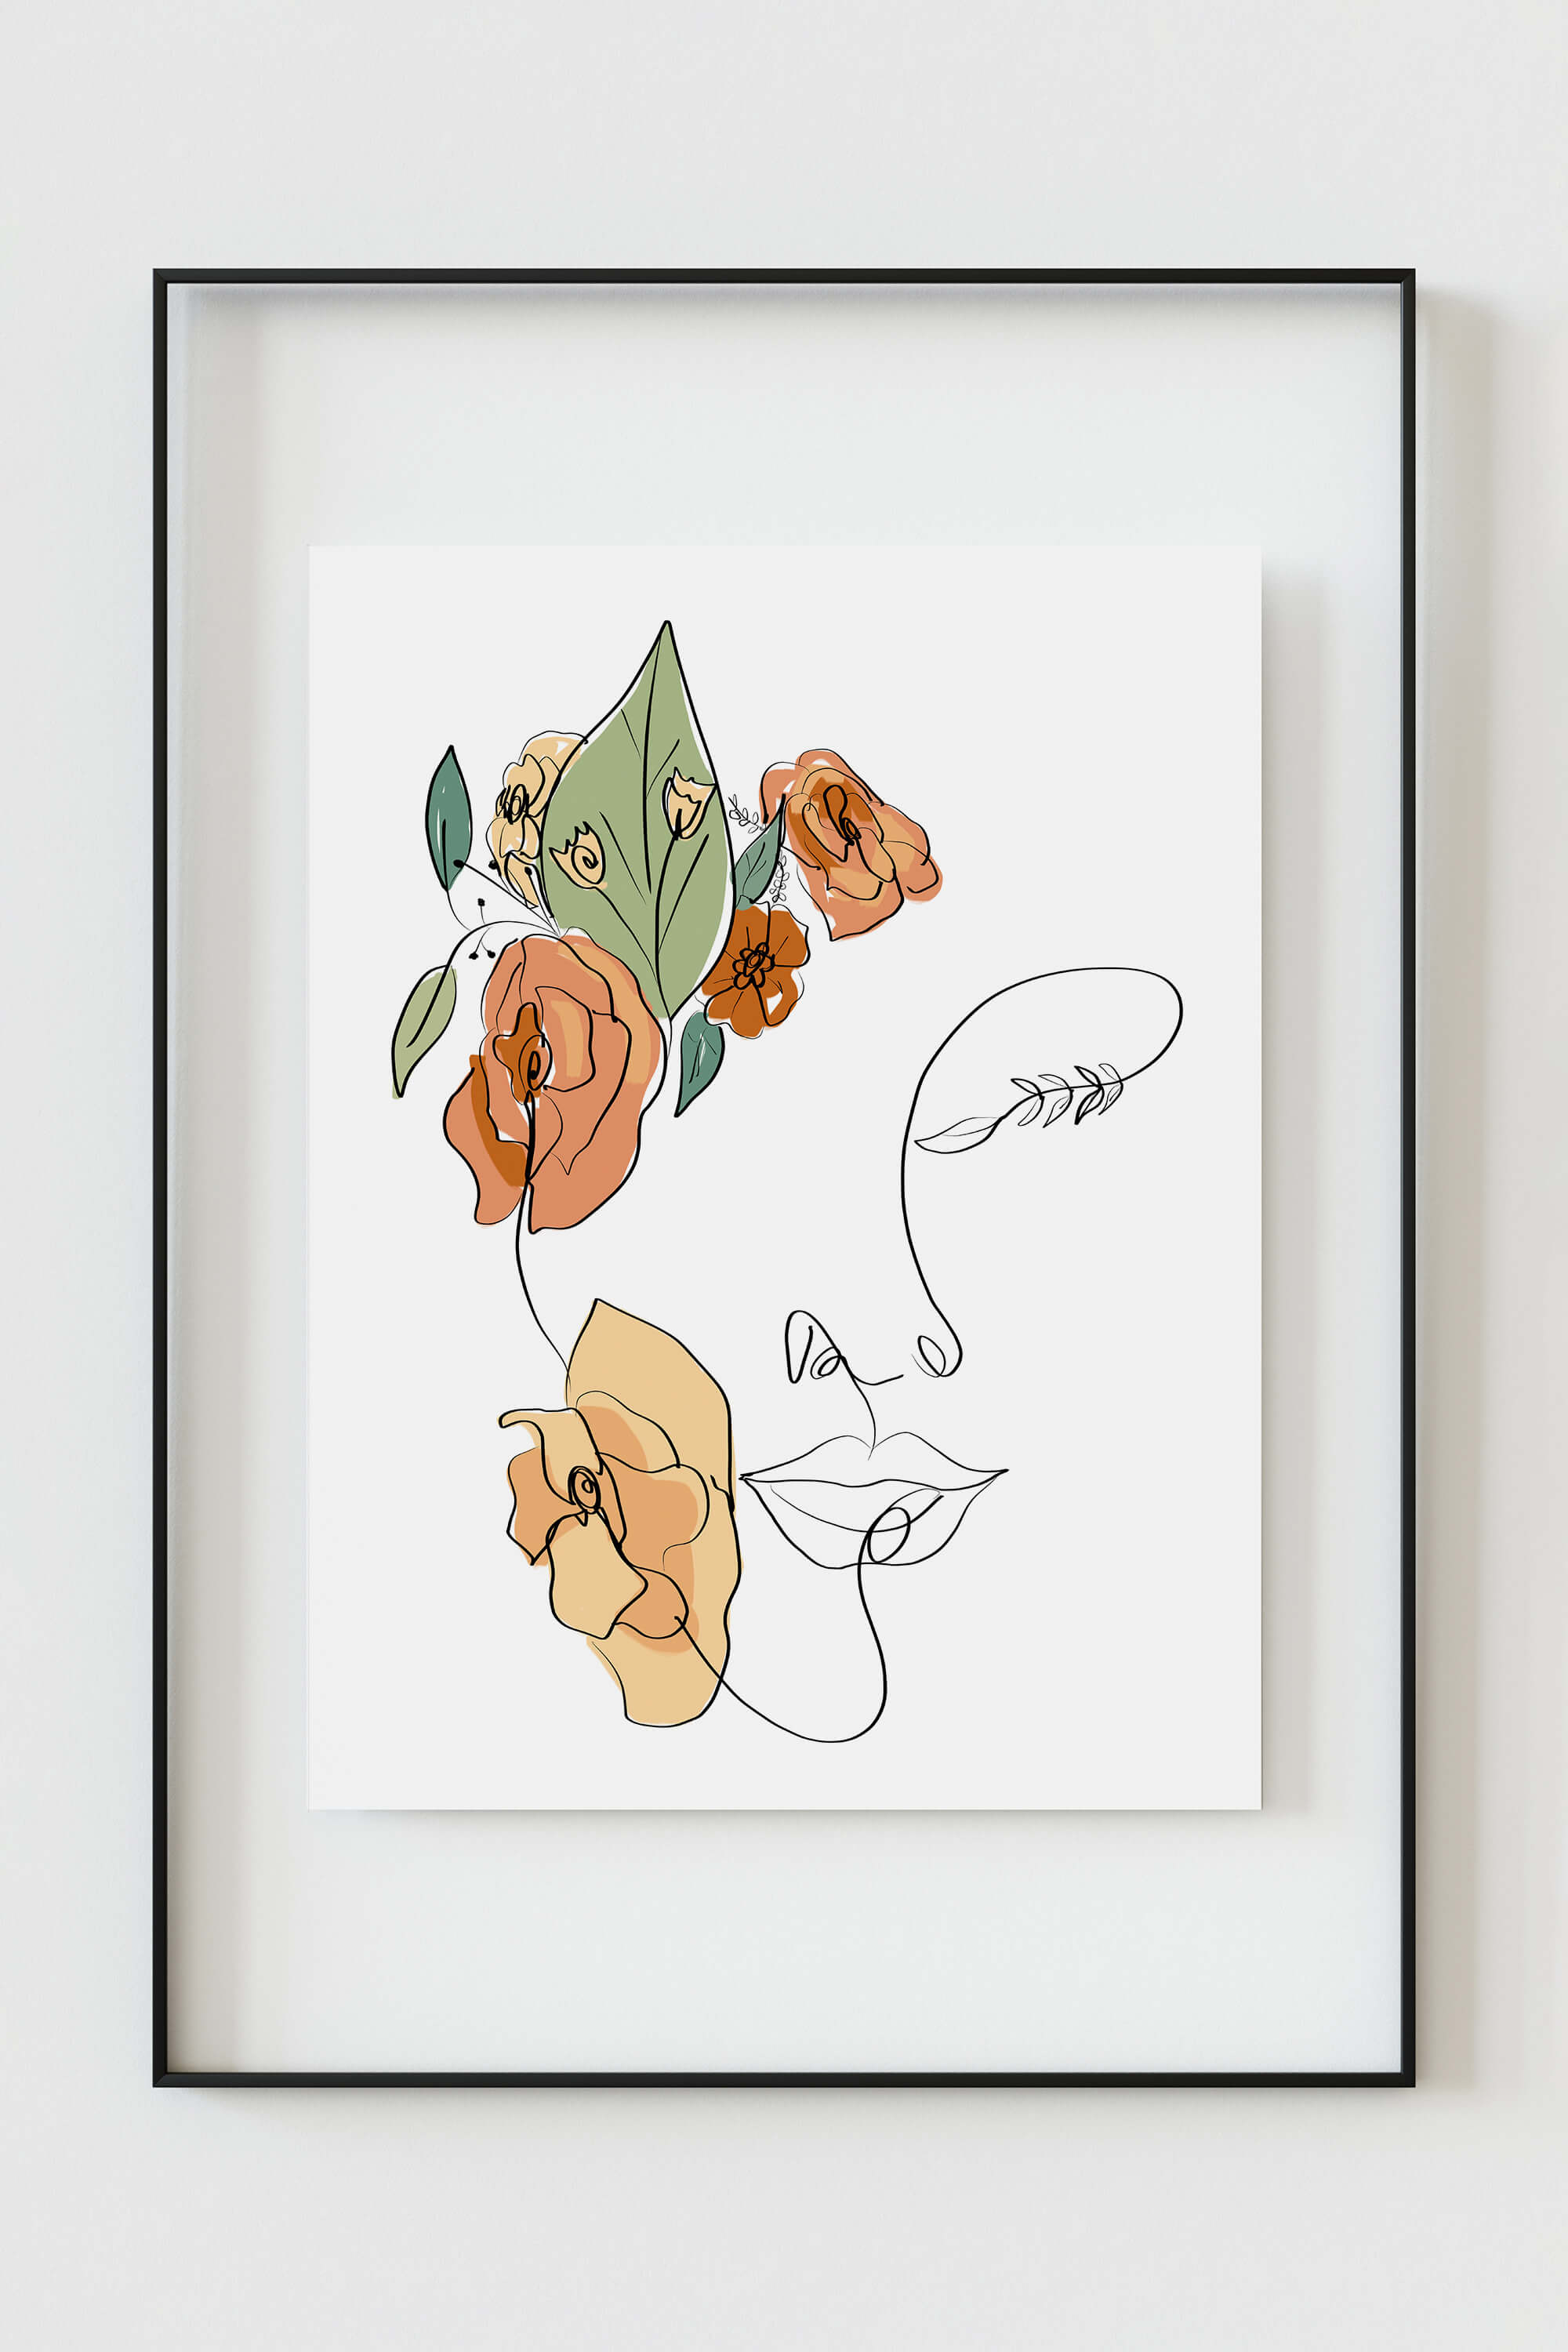 Modern floral wall decor, sophisticated and refined, intertwining striking floral elements with a woman's face, creating an artistic focal point that harmonizes seamlessly with modern aesthetics.